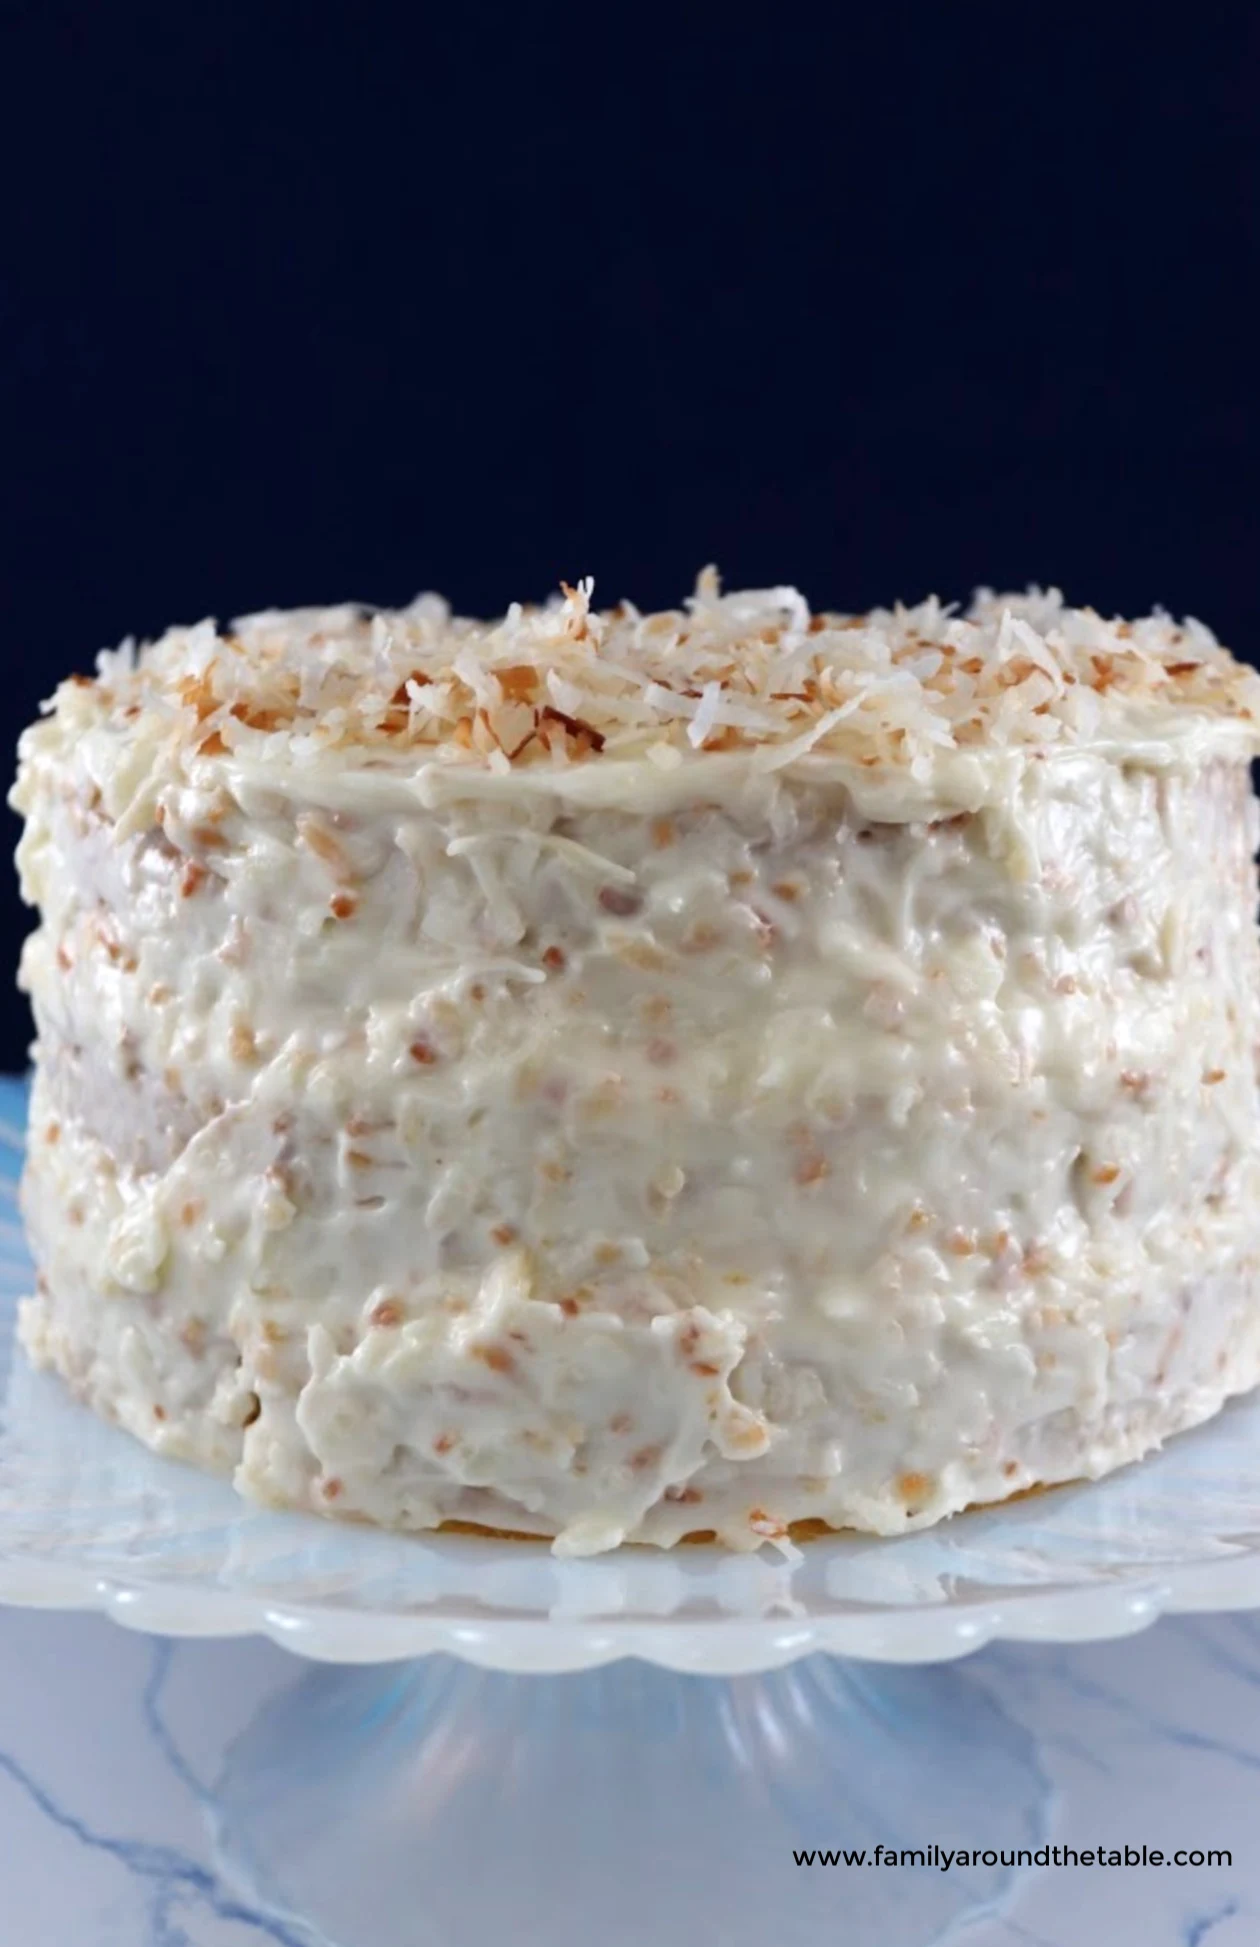 Coconut cake on a cake stand